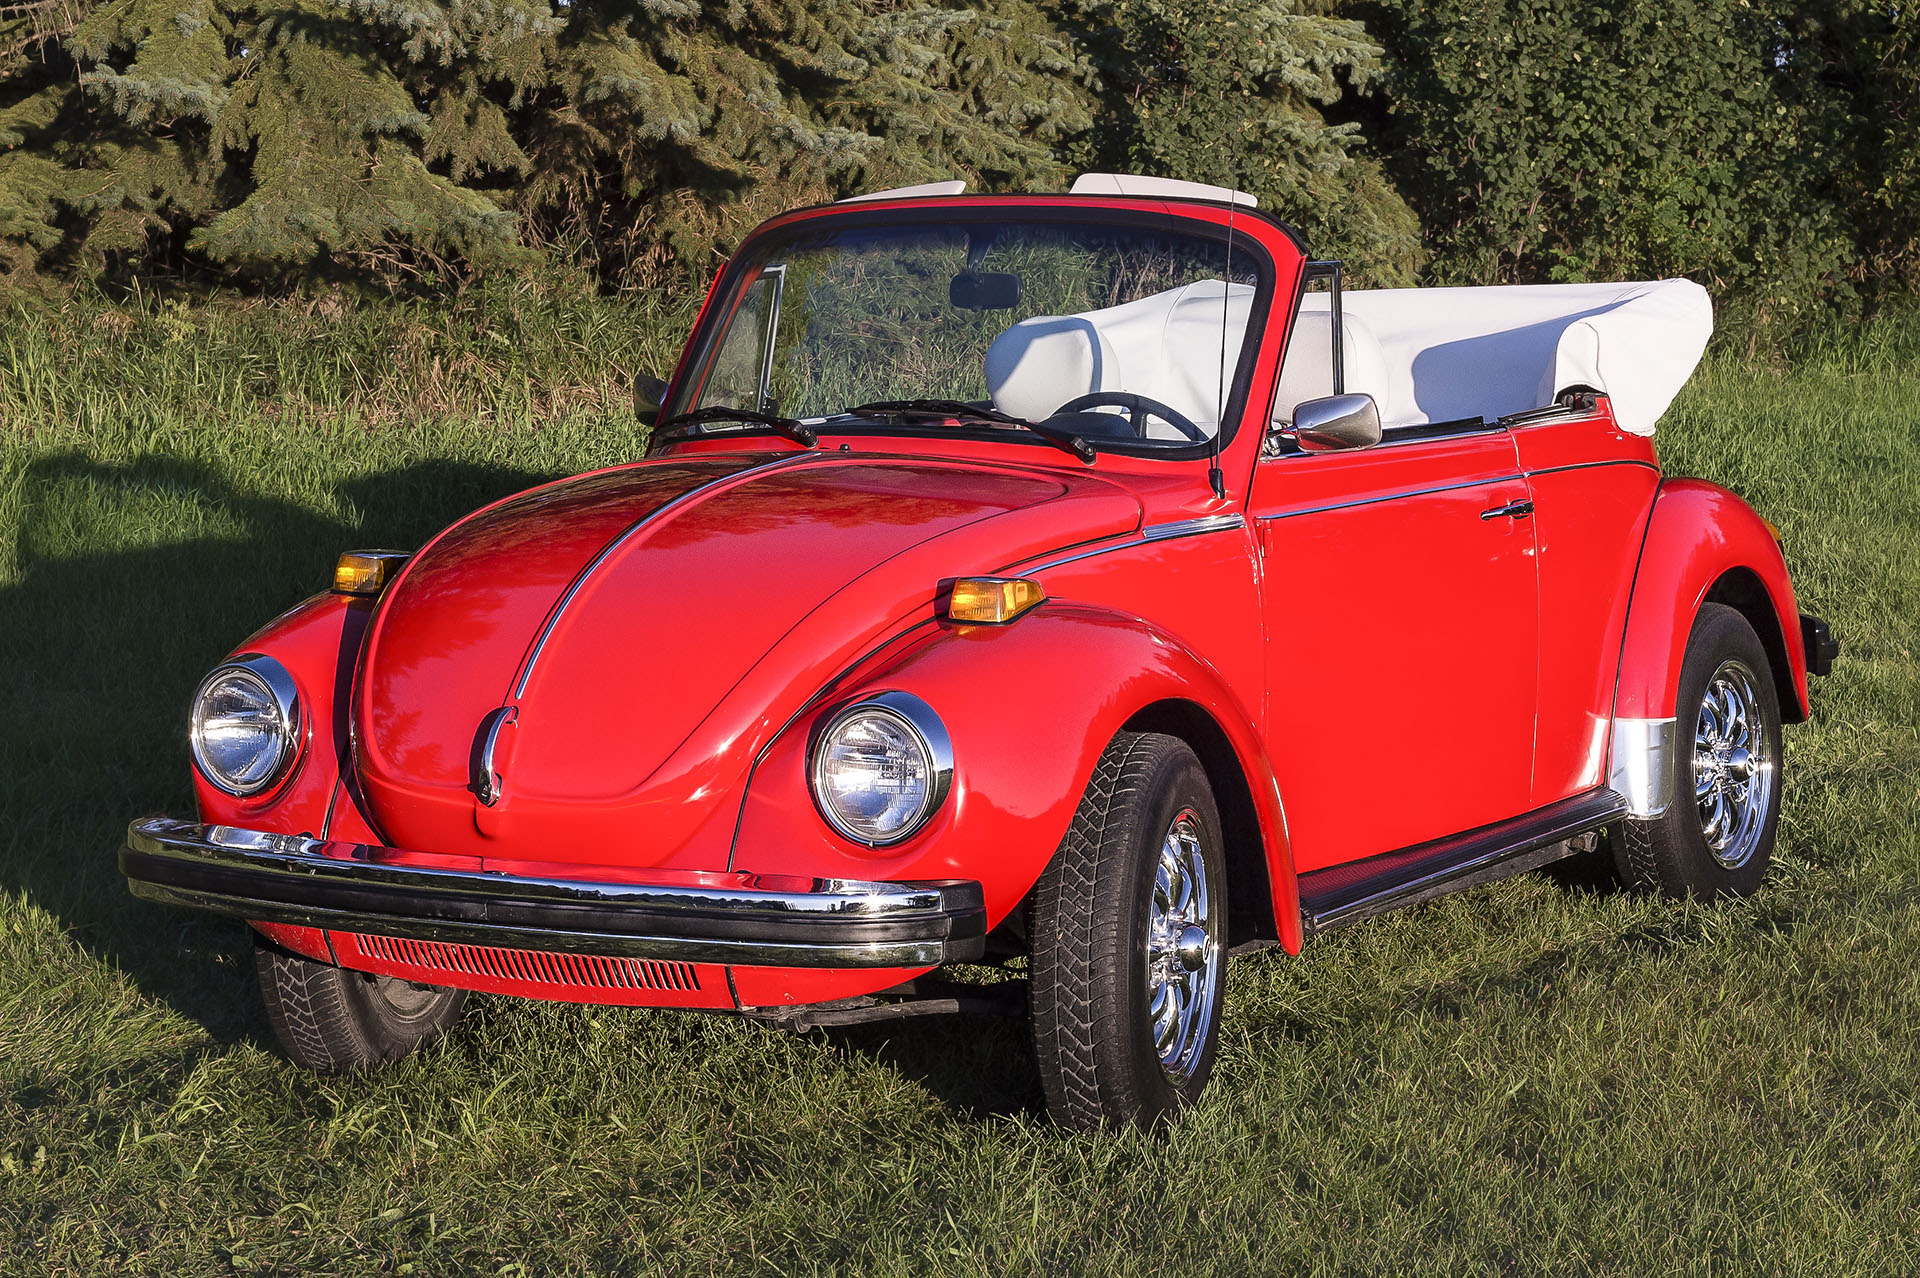   1979 Volkswagen Karmann Convertible   Sold new in Phoenix Arizona and remained there with the original owner until 2014 when brought to Lloydminster. Last year of the original Beetle. Limited number were made in Mars Red paint color. 33,000 origina